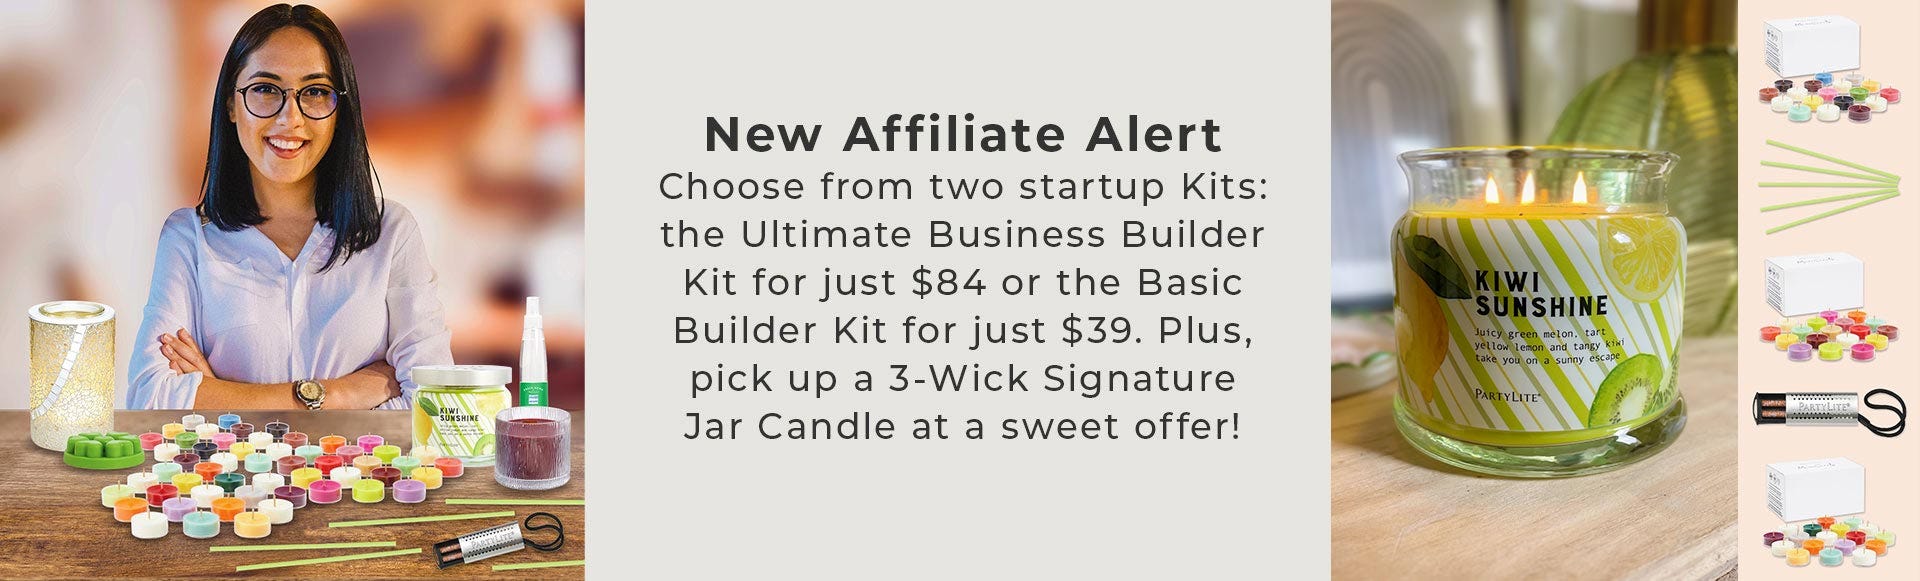 New Affiliate Alert!  Choose from two startup kits: the Ultimate Business Builder Kit for $84 or the Basic Business Builder Kit for just $39.  Plus, pick up a 3-Wick Signature Jar Candle at a sweet offer!